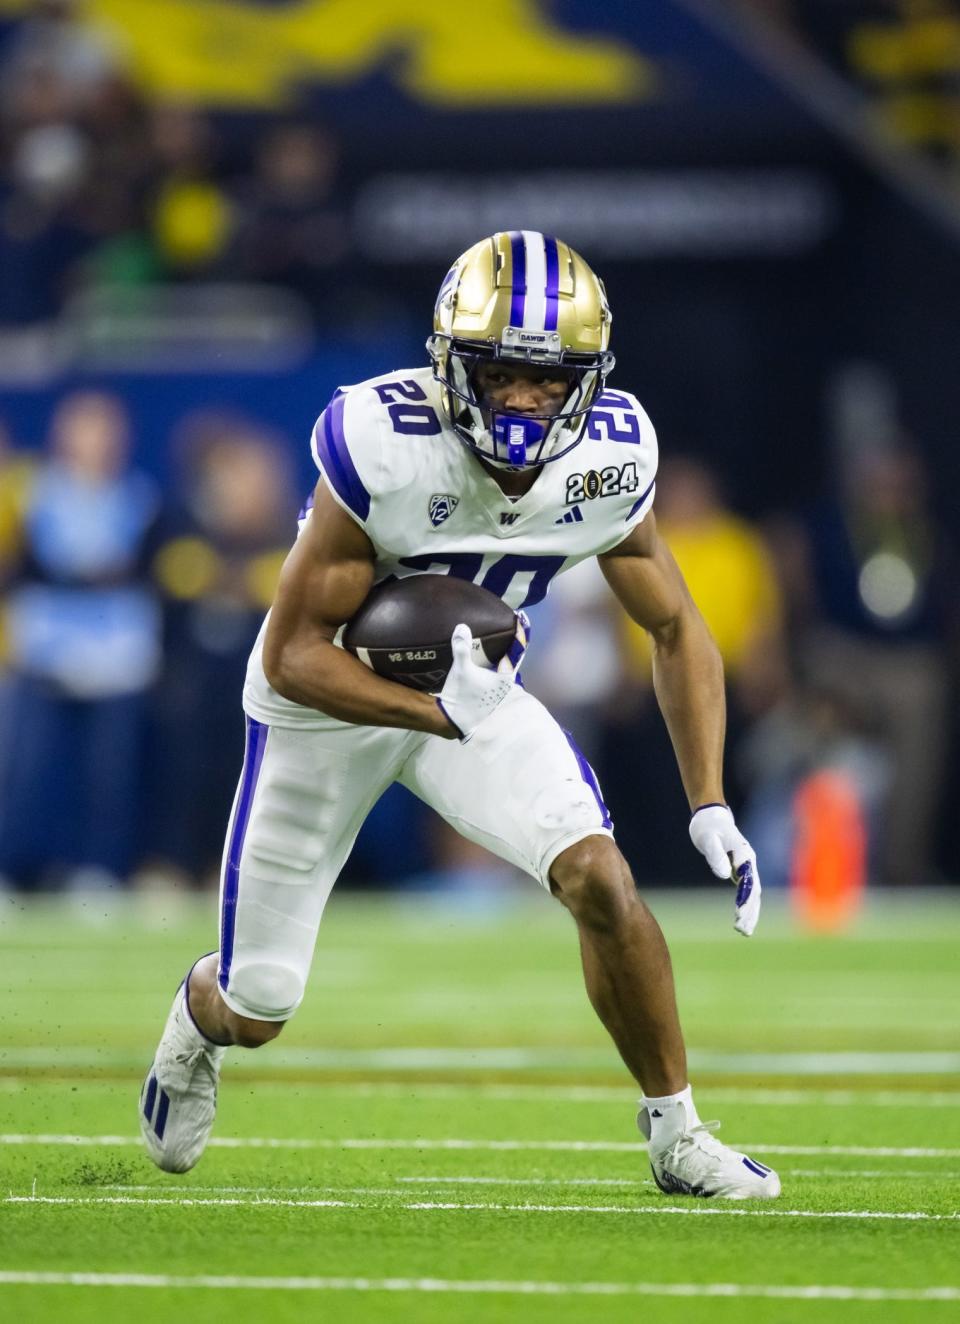 Washington Huskies running back Tybo Rogers carries the ball against Michigan during the 2024 College Football Playoff national championship game in Houston.